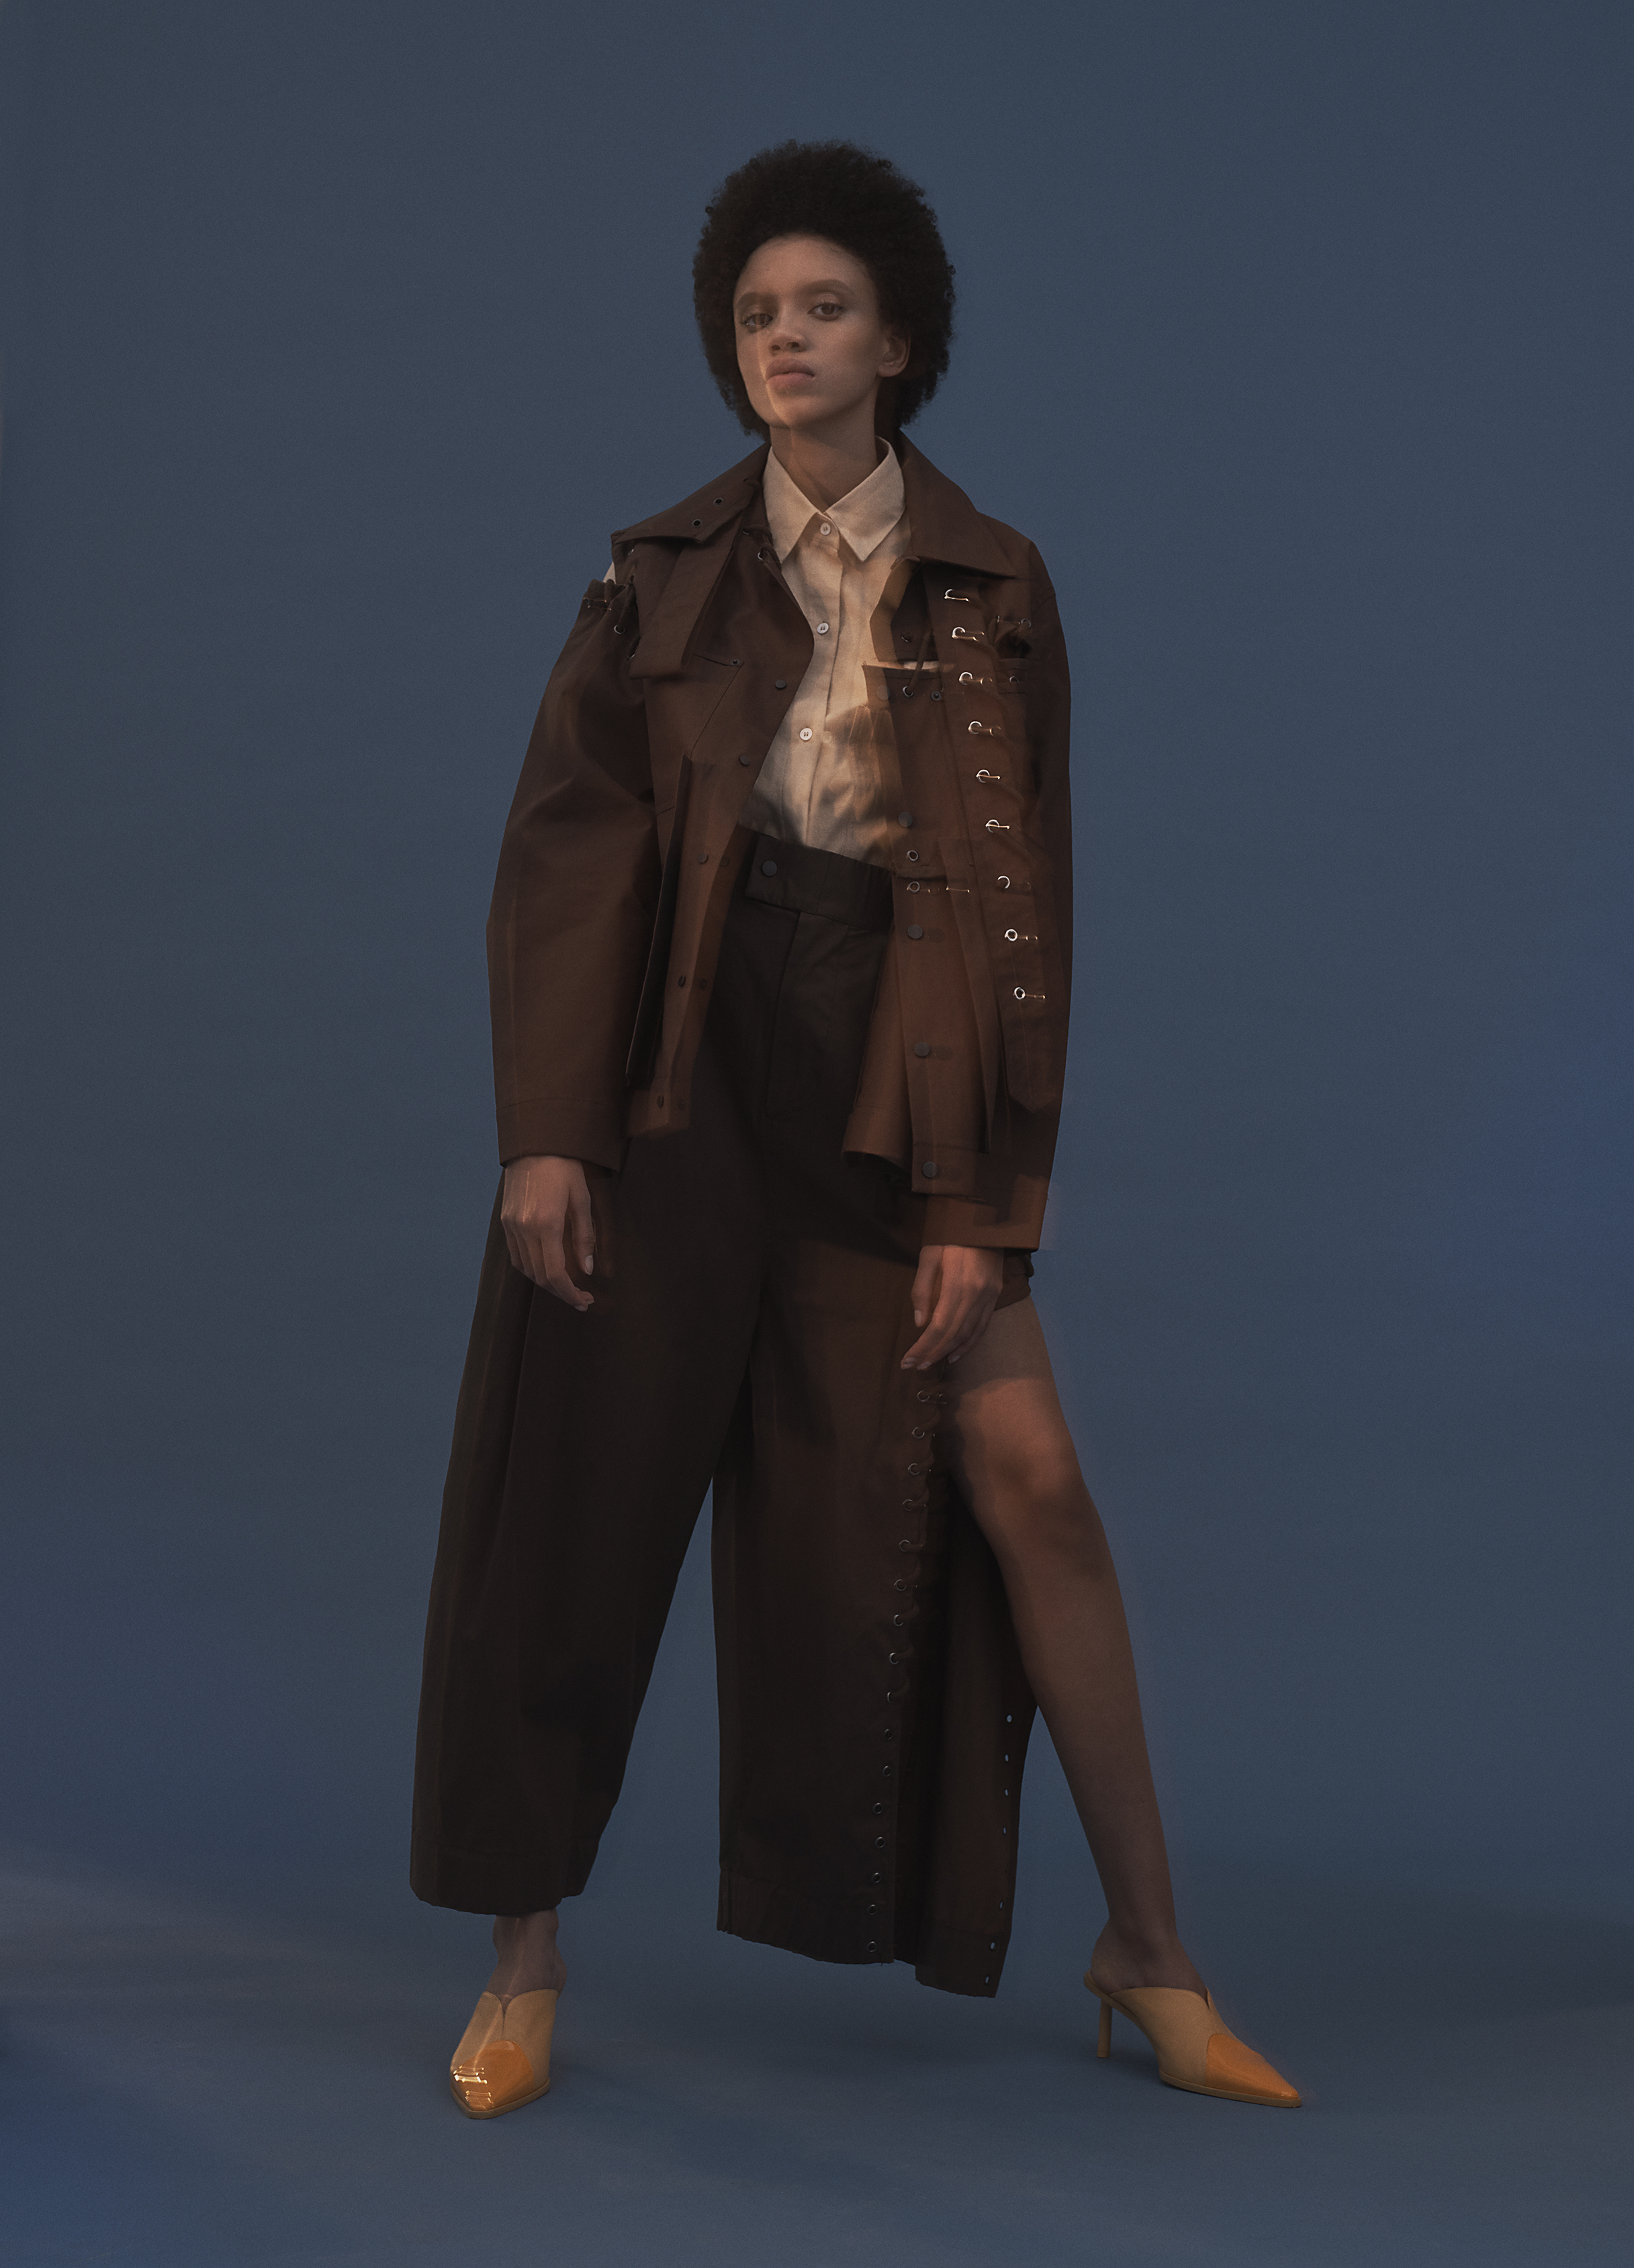  Laced brown jacket and trousers CRAIG GREEN, wide short sleeve shirt NEHERA, yellow pumps CÉLINE. 